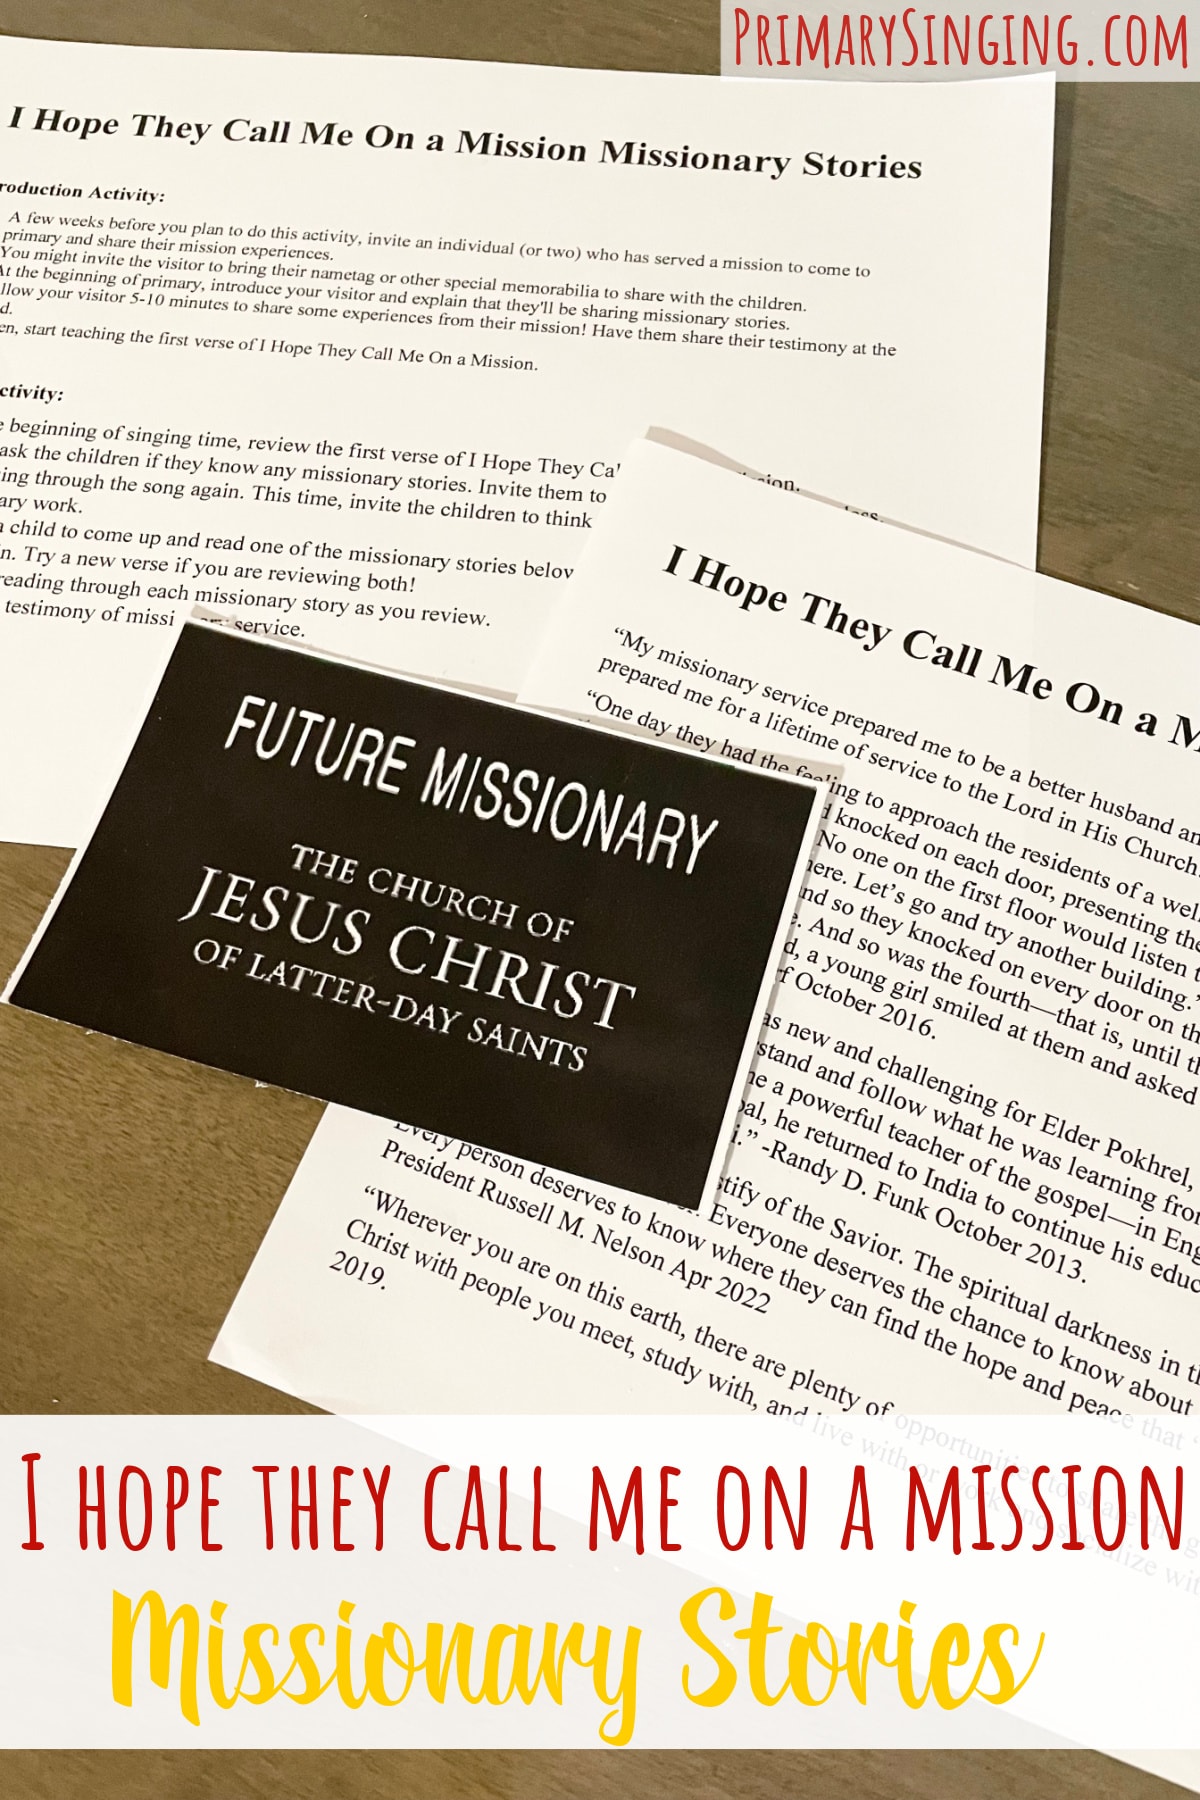 I Hope They Call Me On a Mission Missionary Stories Easy singing time ideas for Primary Music Leaders I Hope They Call Me On a Mission Missionary Stories